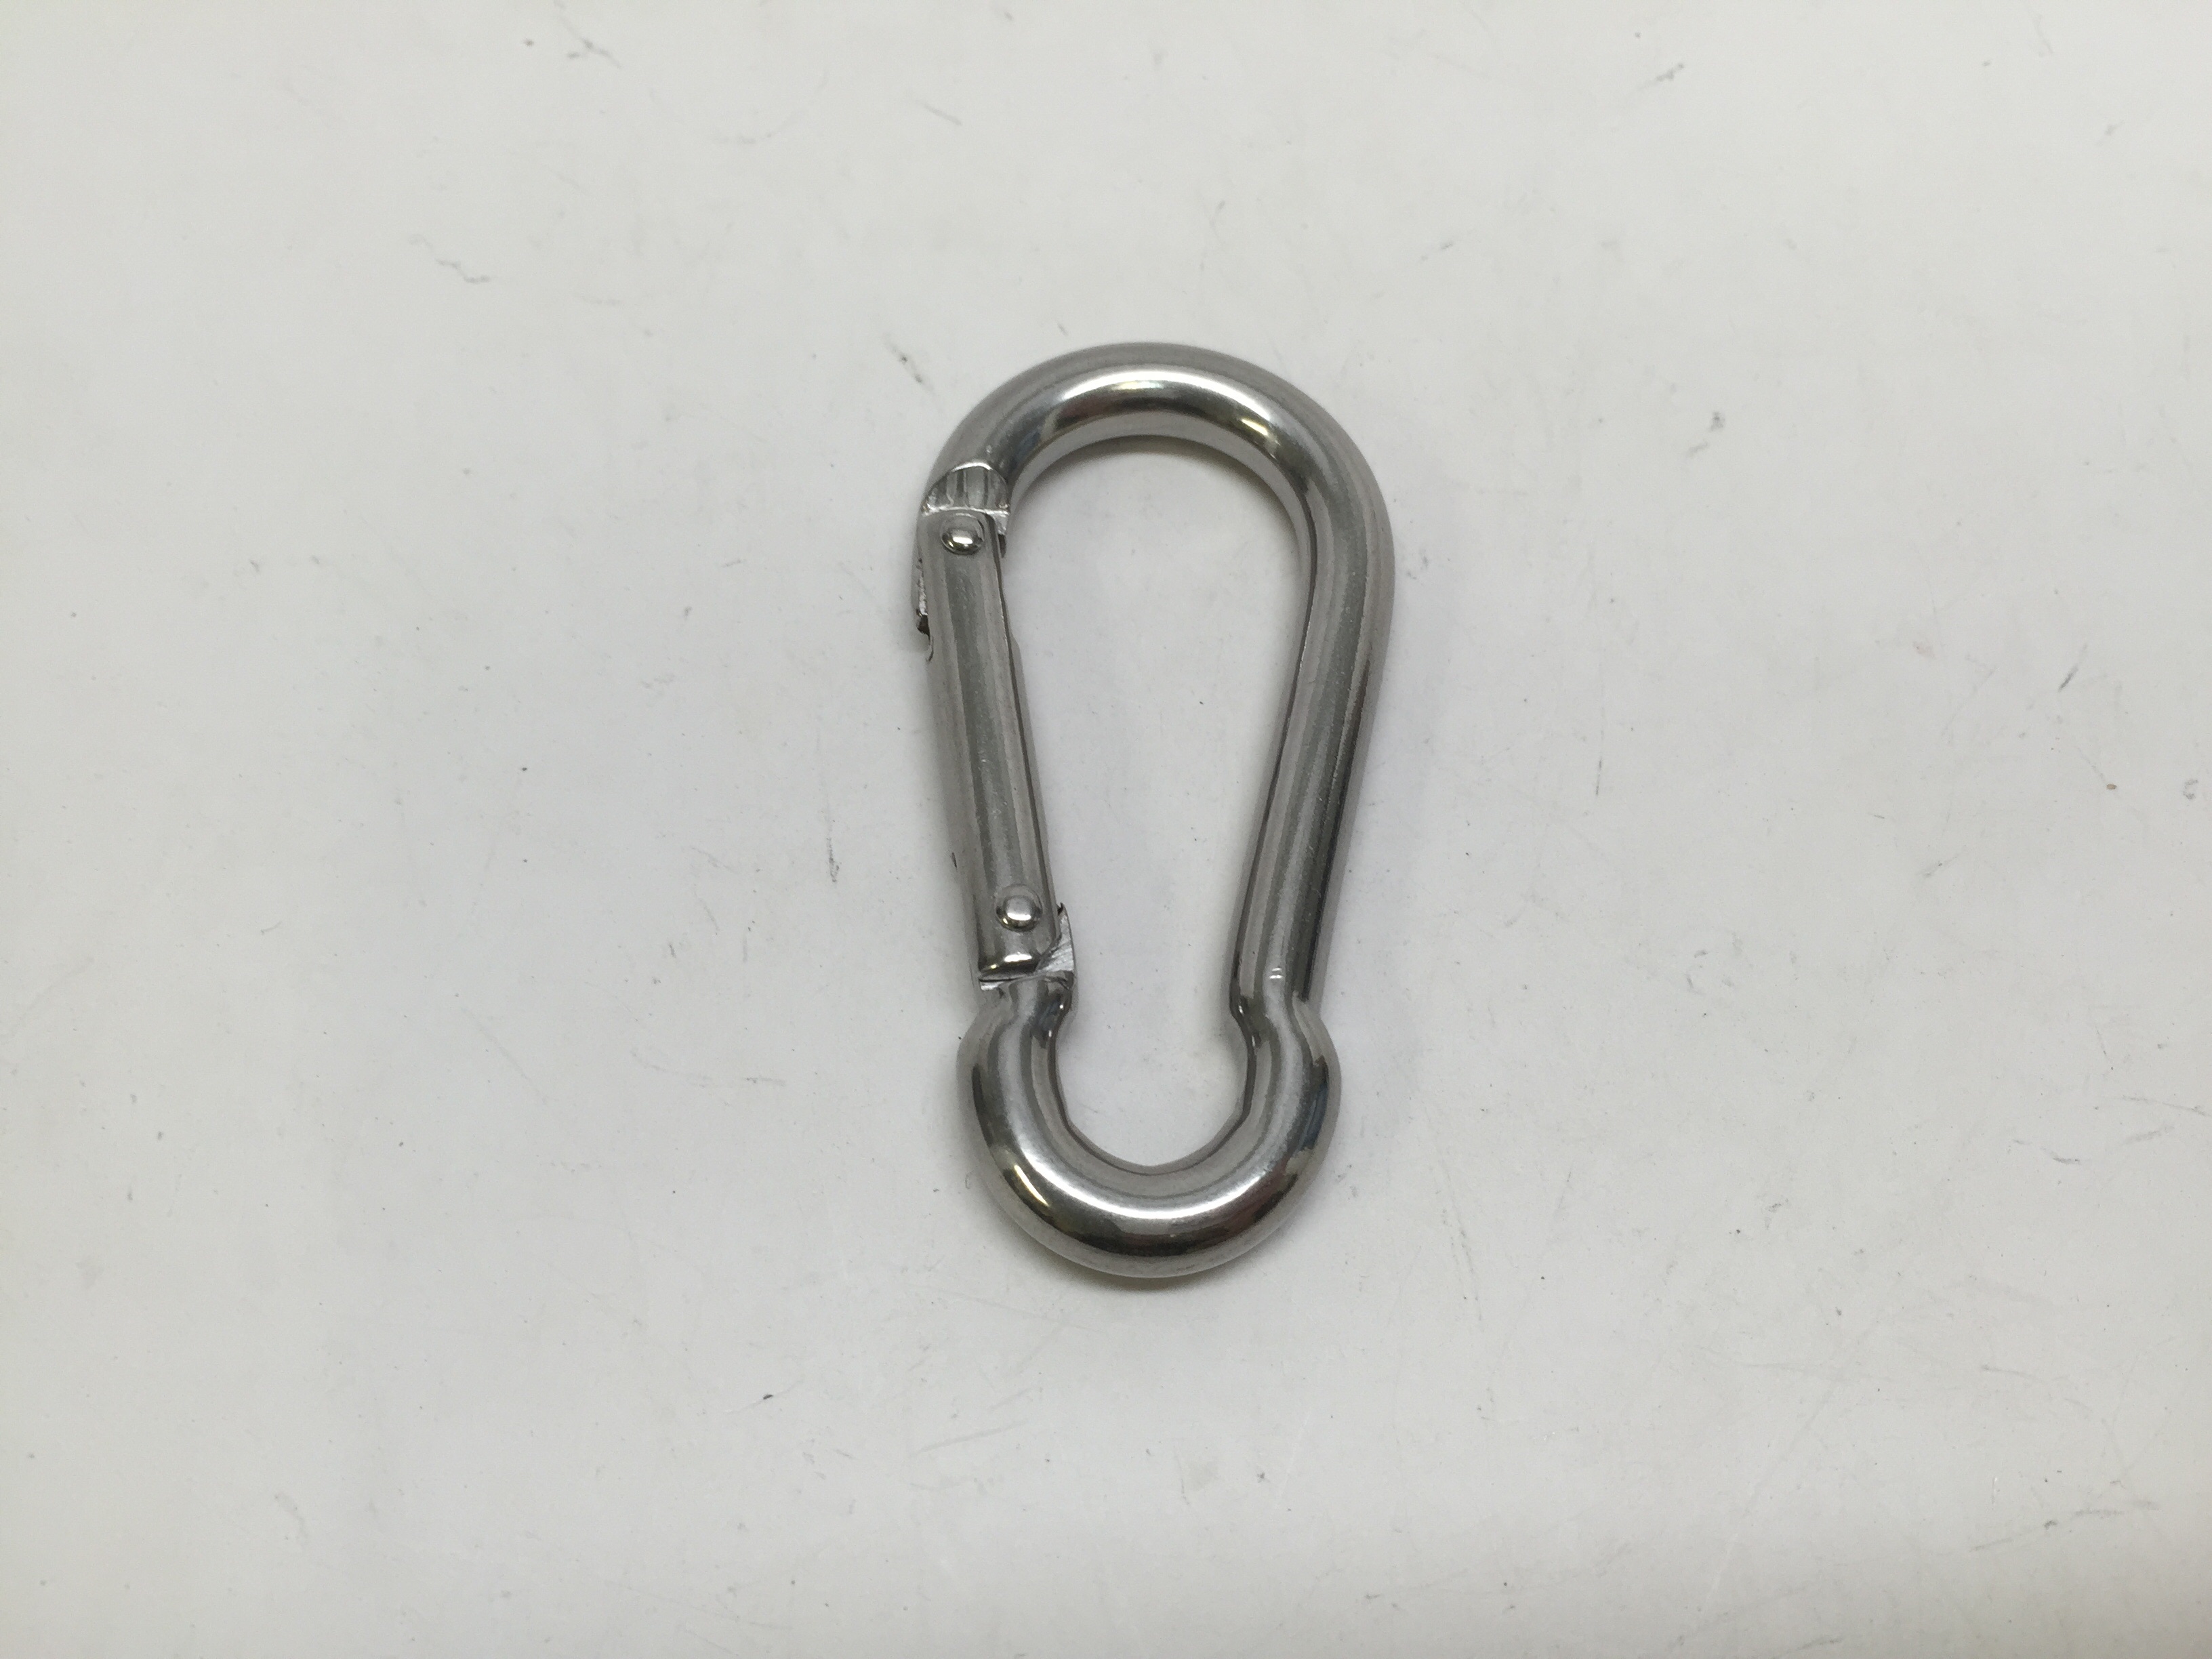 MARINE BOAT HARDWARE SS316 RIGGING ACCESSORIES SECURITY SAFETY SNAP HOOK  2&a Marine and RV Lighting & Accessories - Pactrade MarineTAGLINE